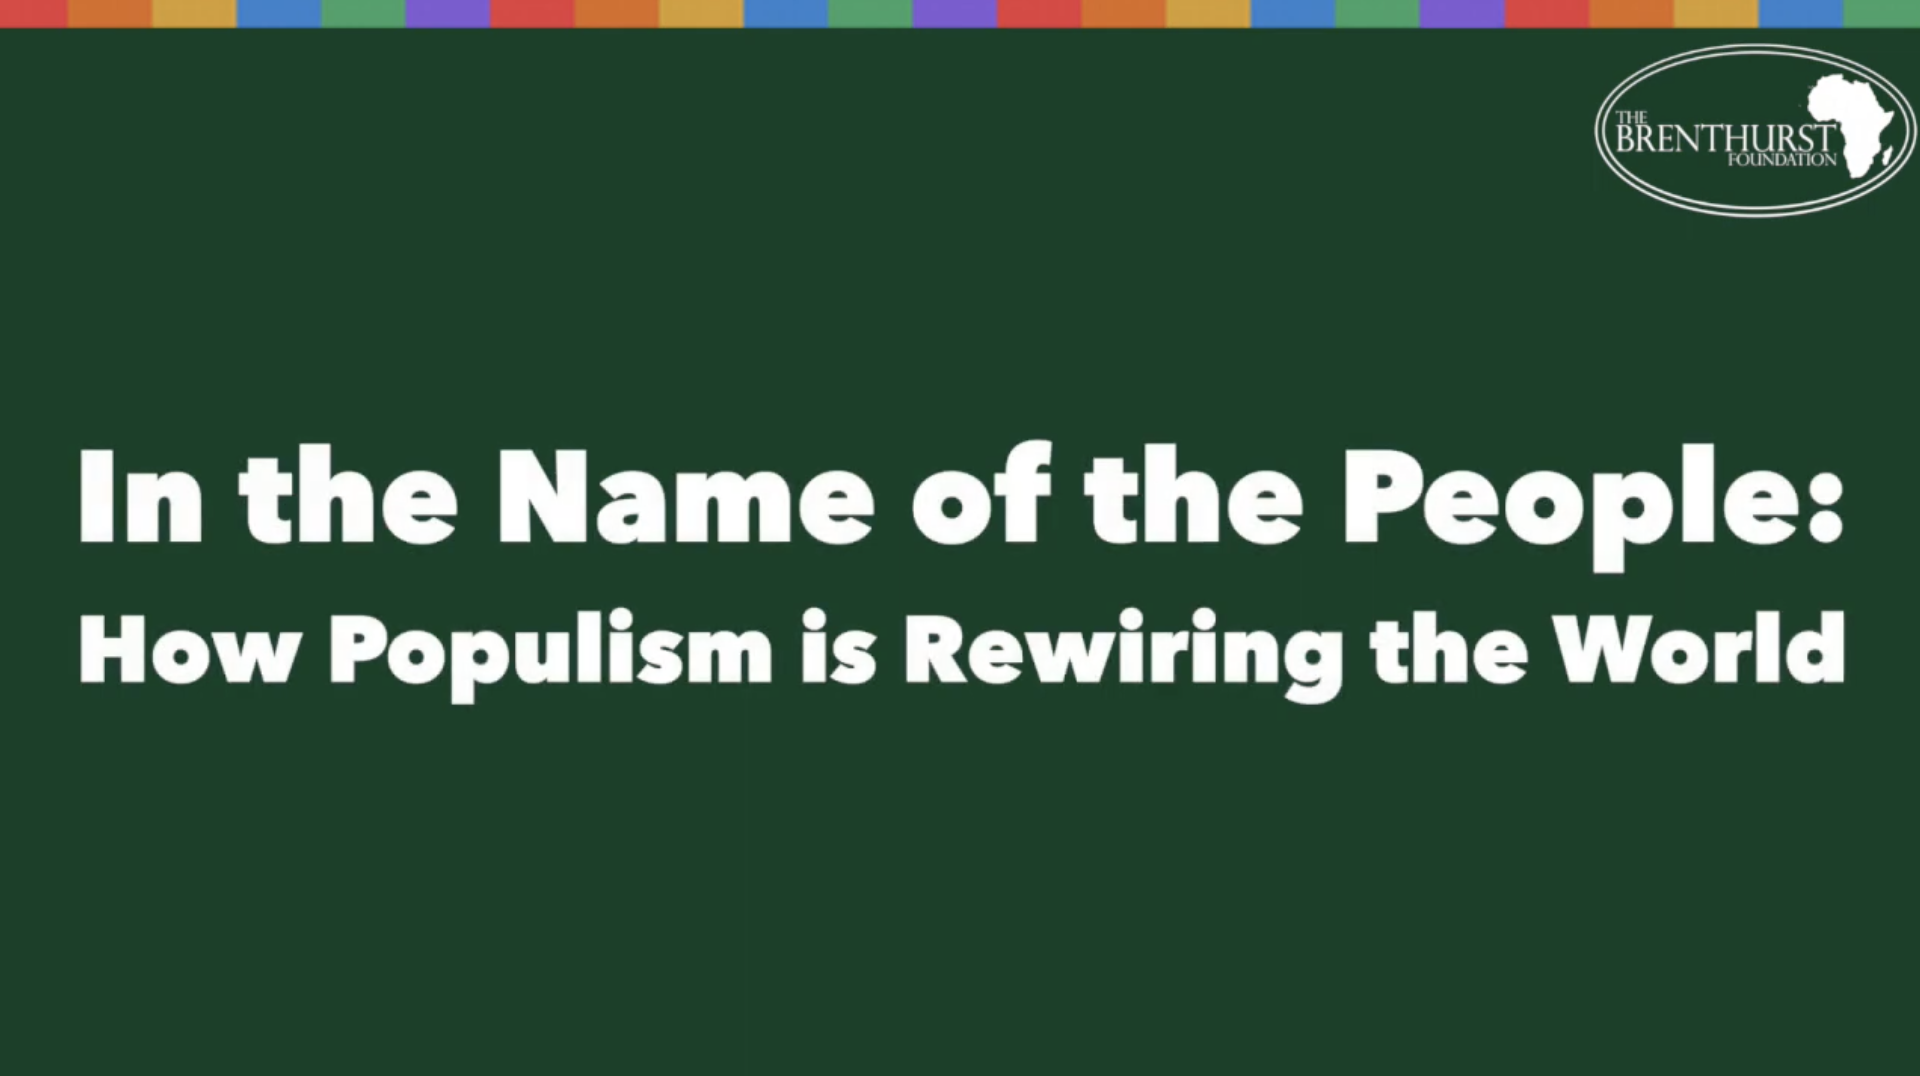 In the Name of the People: How Populism is Rewiring the World